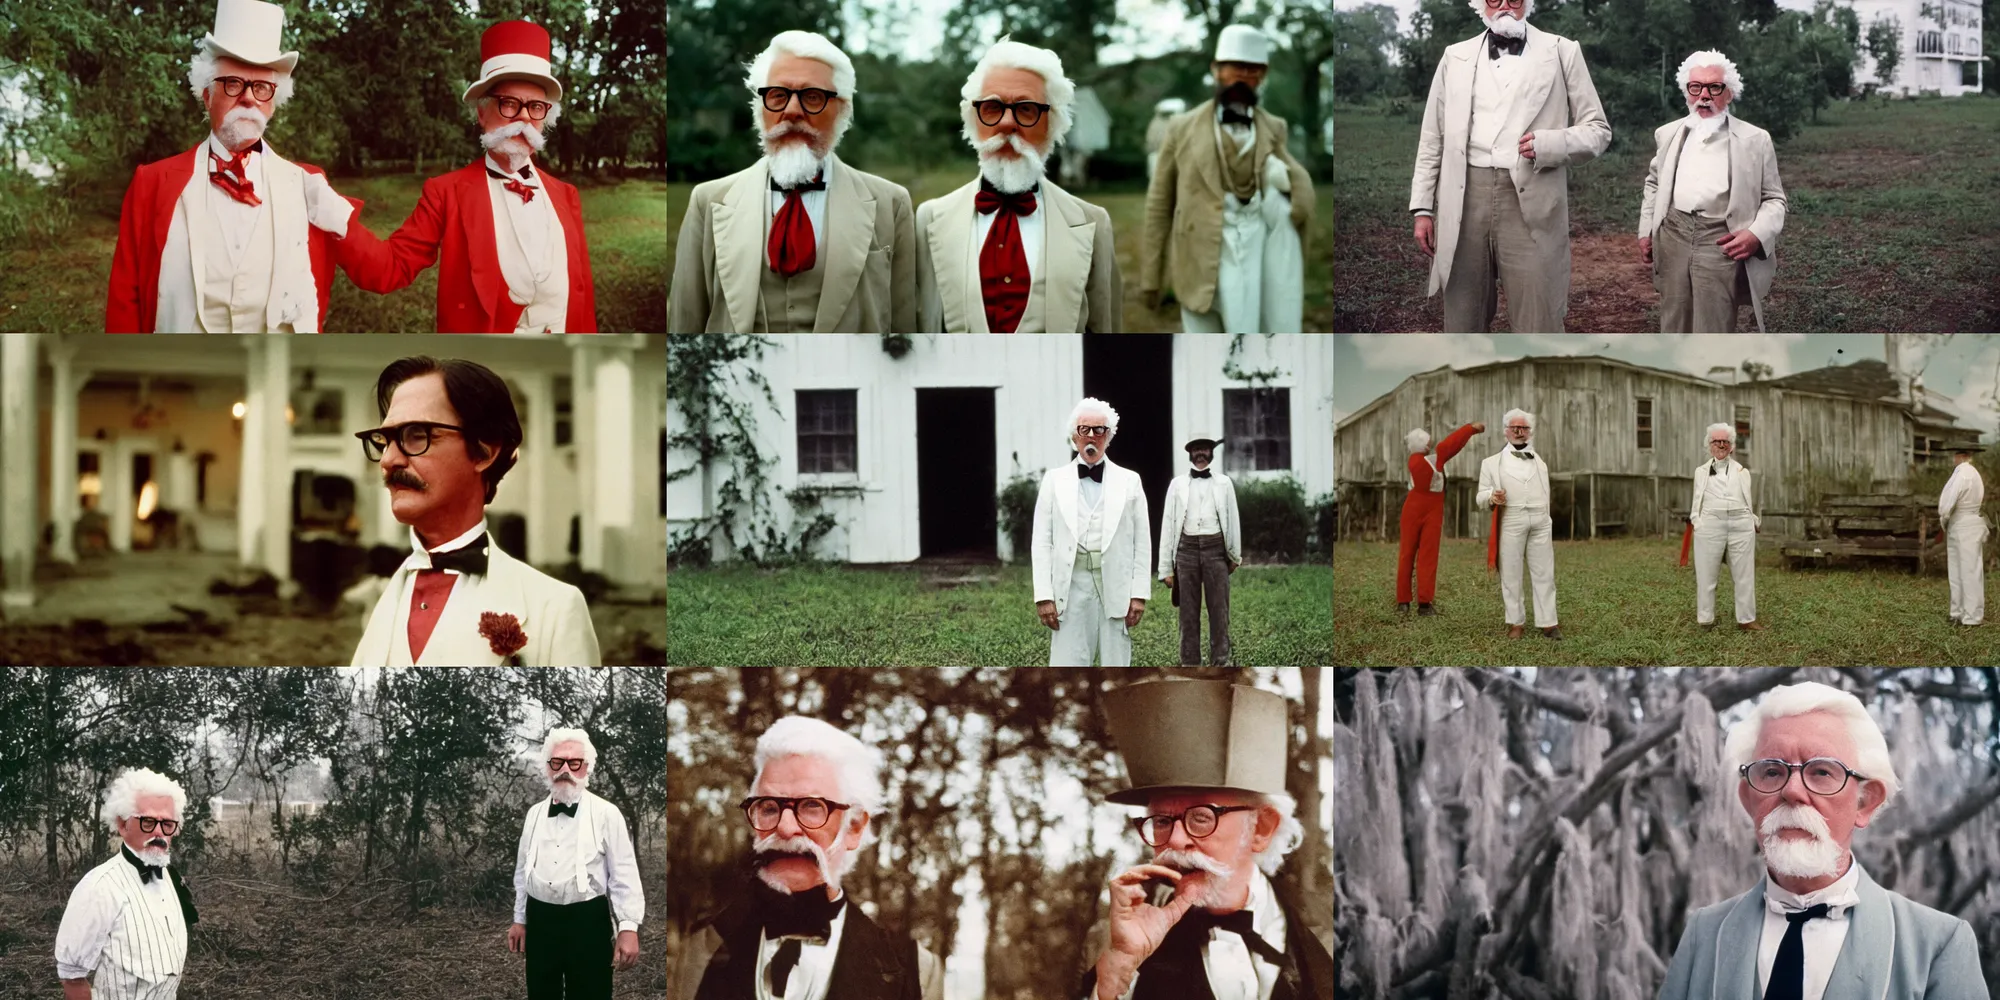 Prompt: colonel sanders plantation owner 1 8 5 0 s directed by wes anderson, cinestill 8 0 0 t, 1 9 8 0 s movie still, film grain